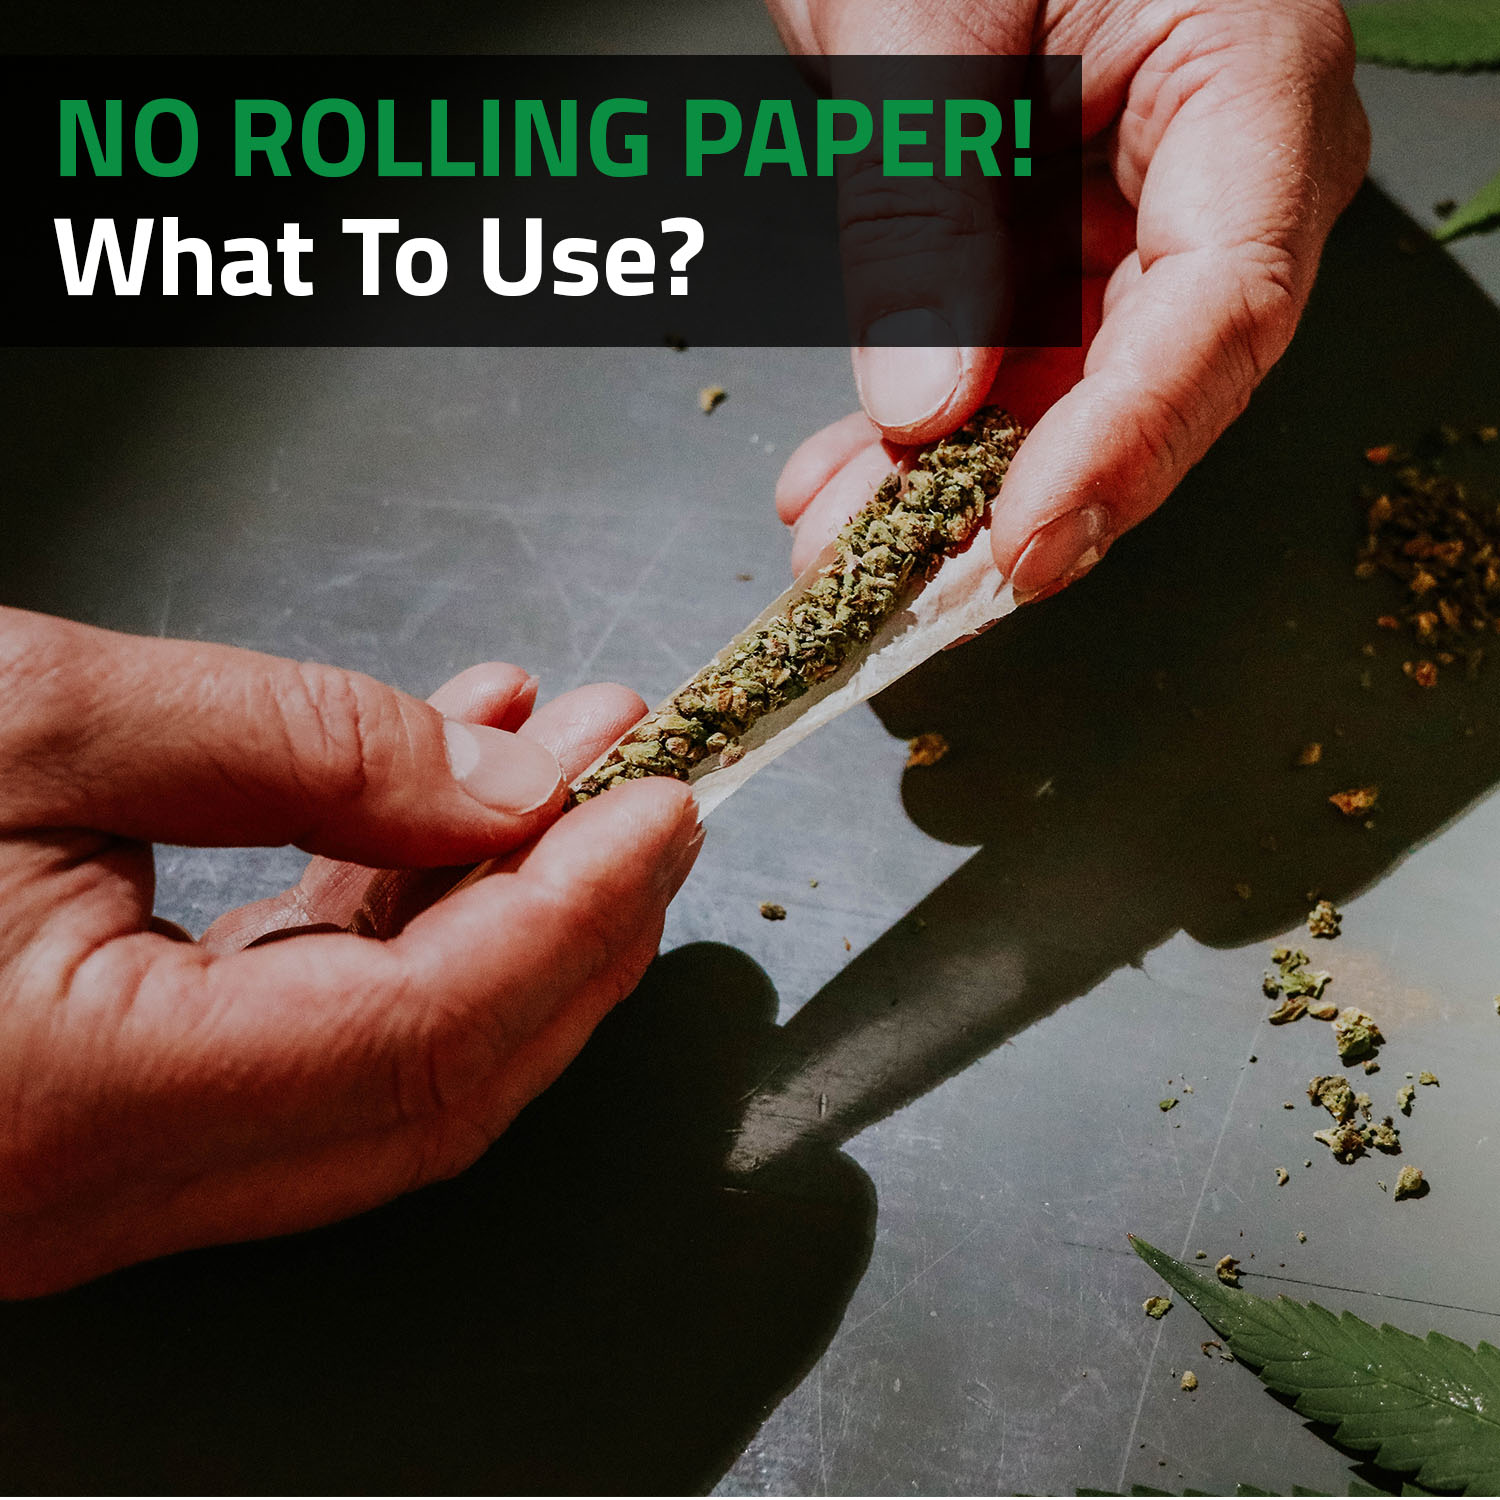 No Rolling Paper! What To Use?